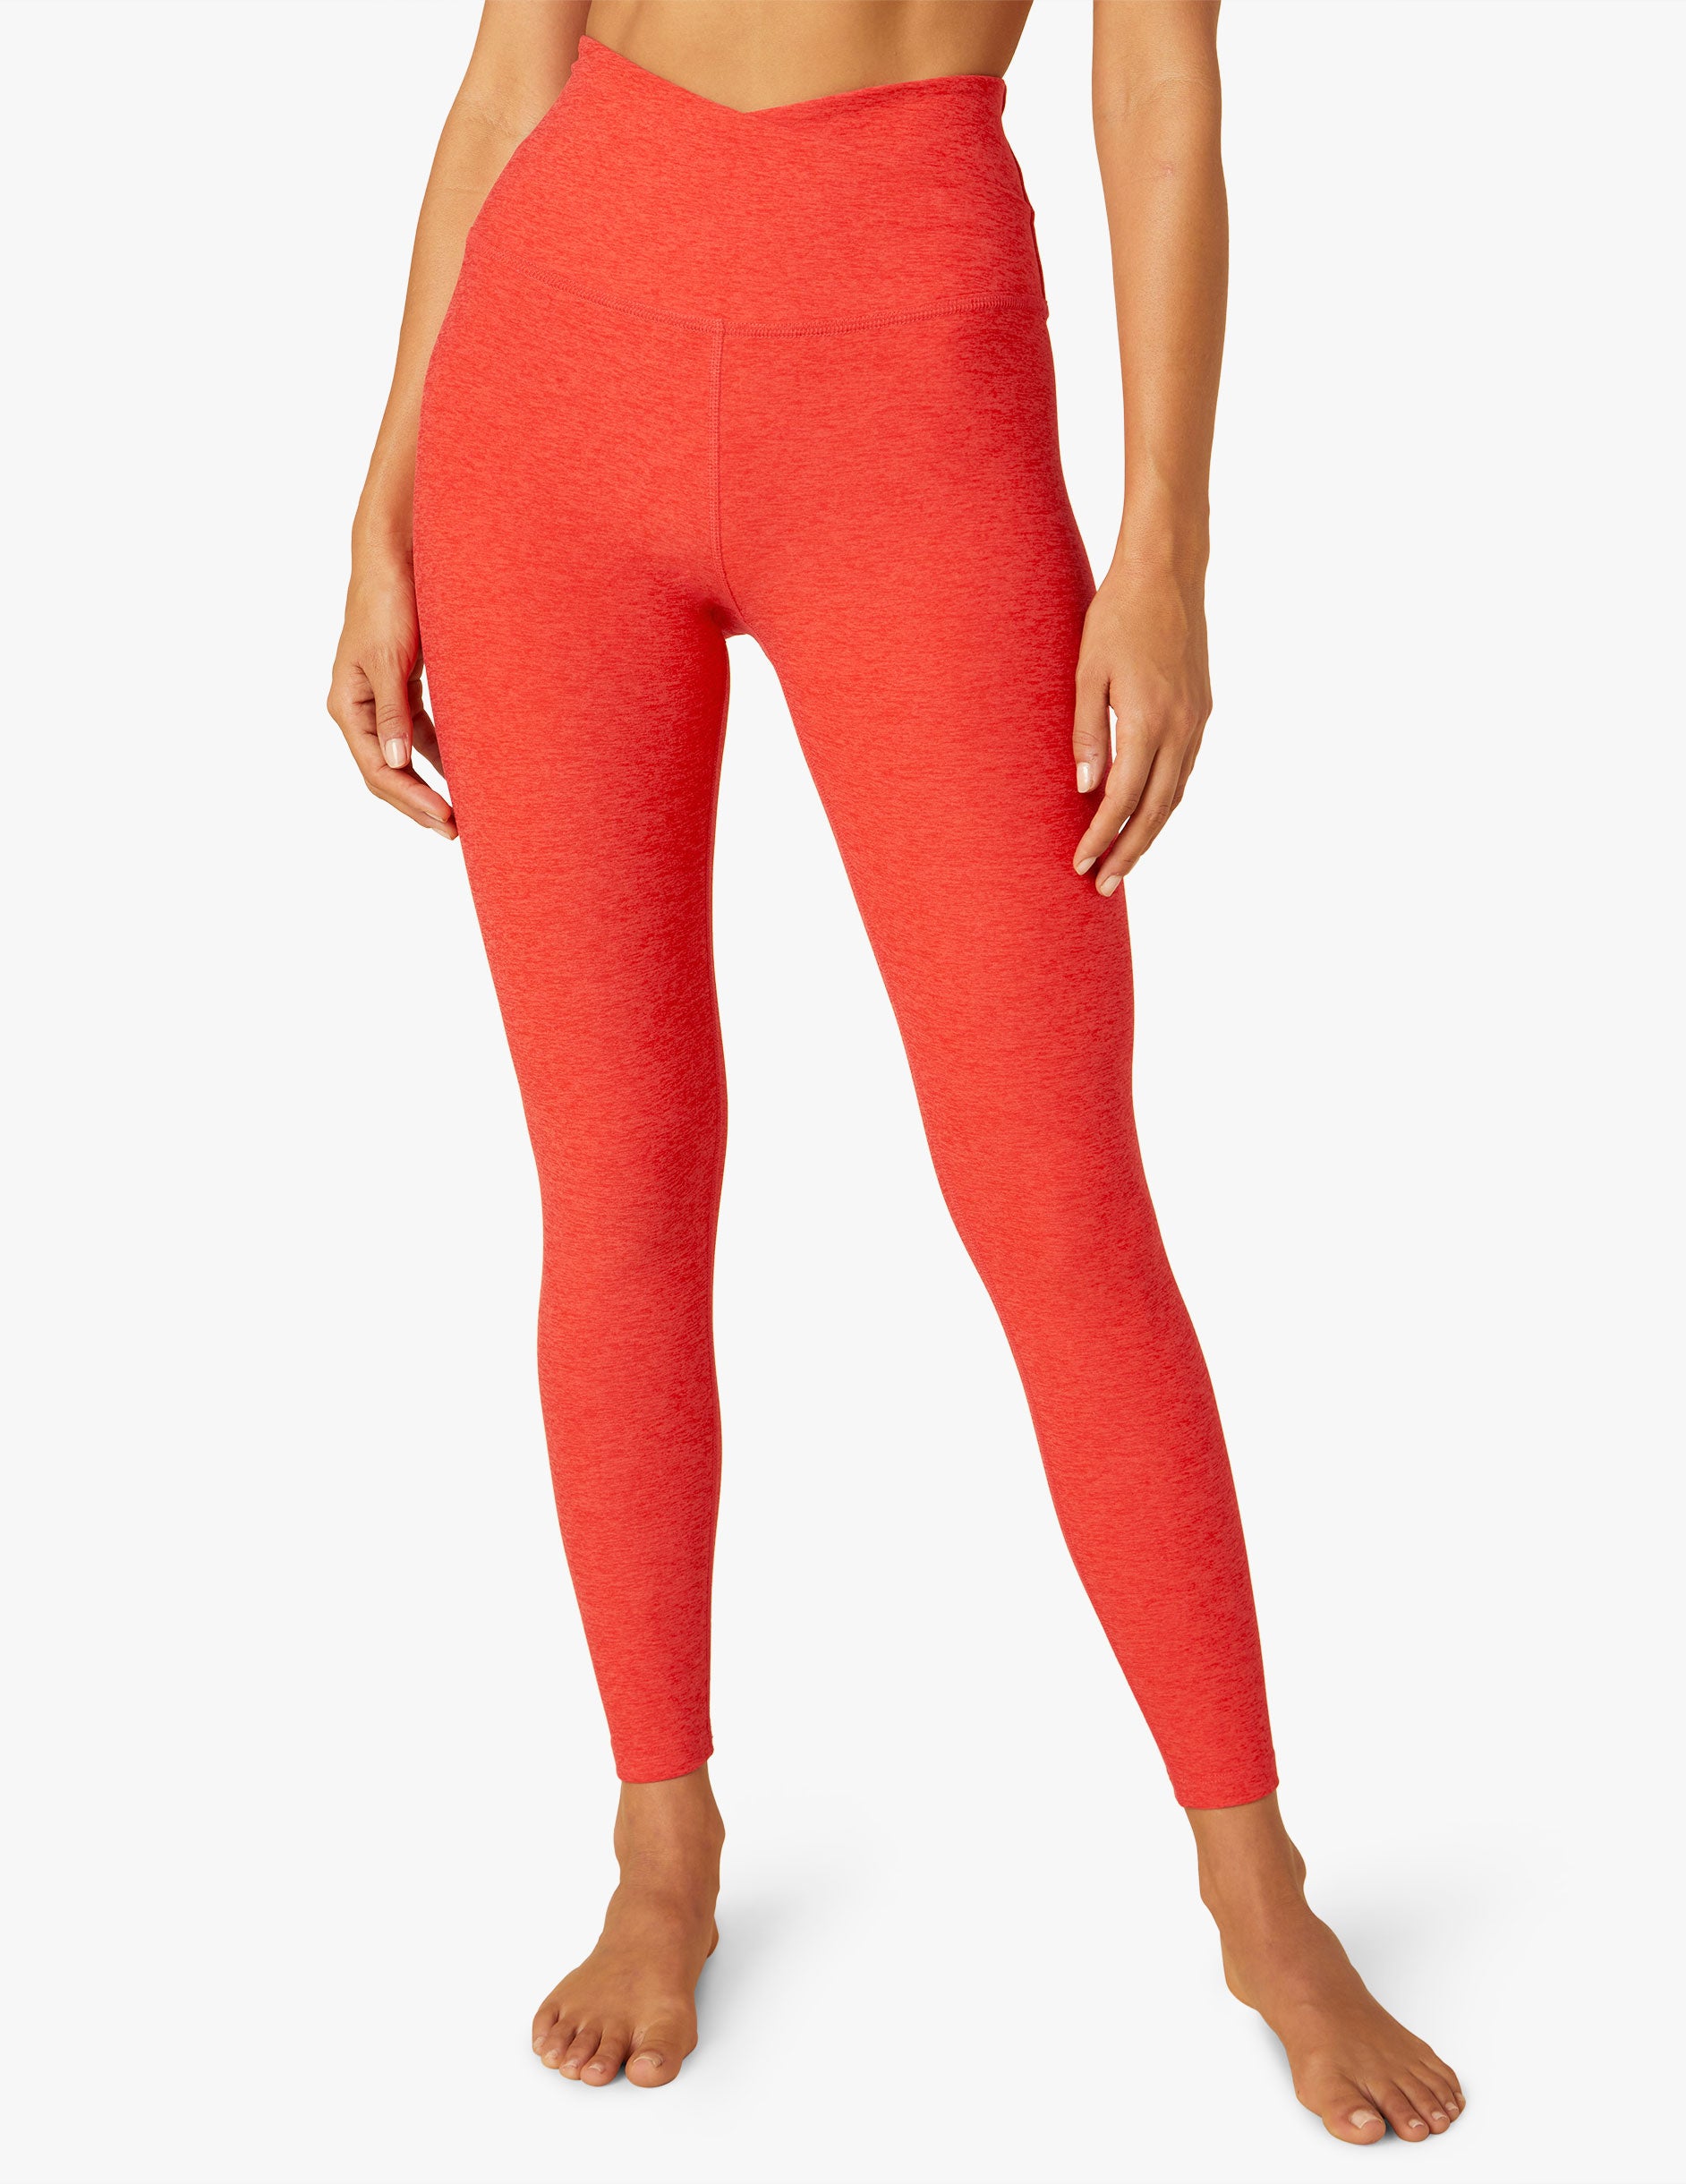 Cotton Candy Skies (High Waisted) Yoga Leggings — Red Hot Yoga Smyrna